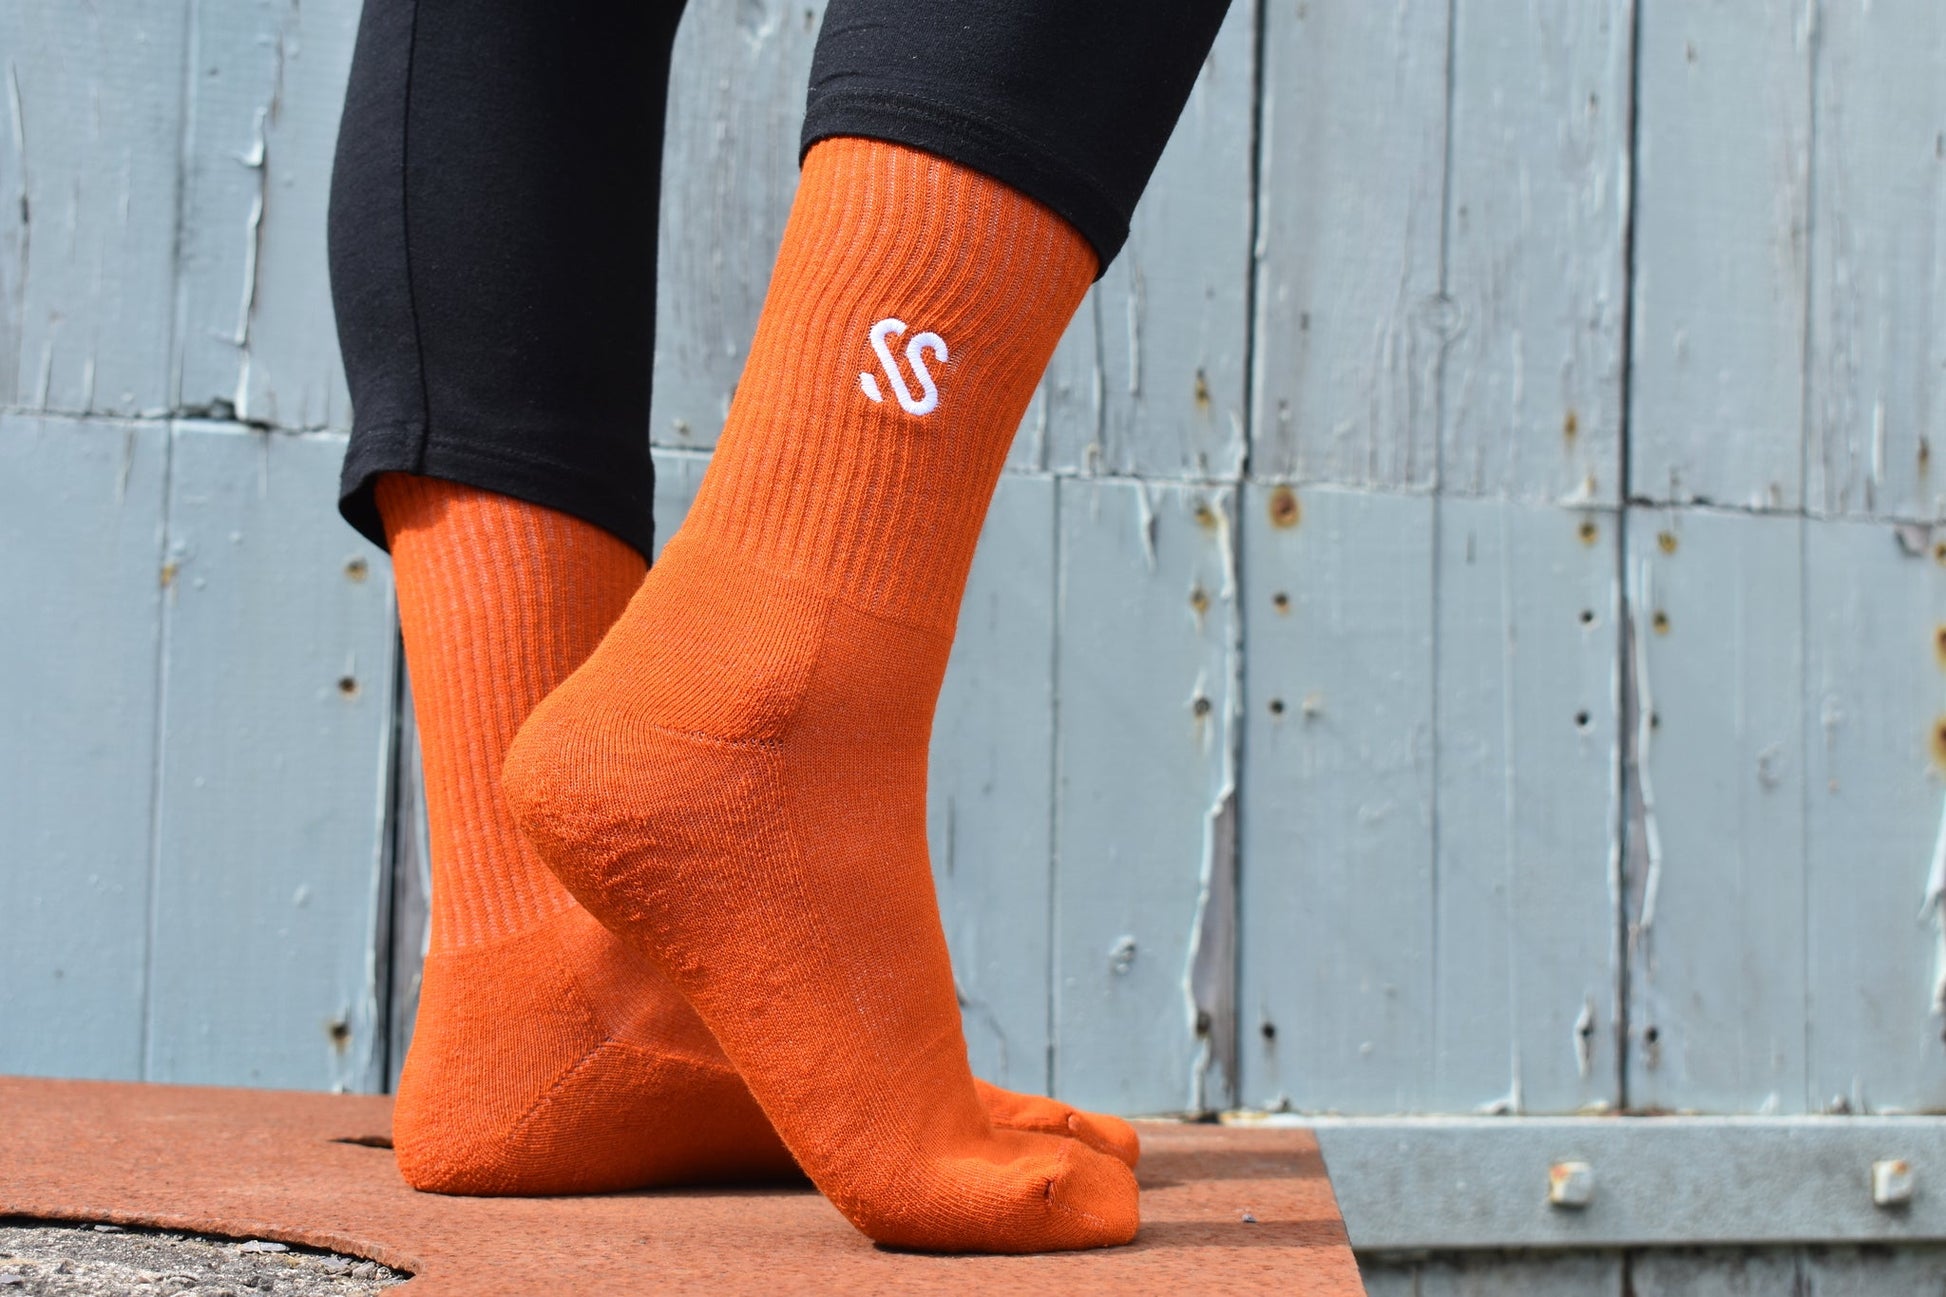 A pair of dark orange combed cotton socks being worn outside